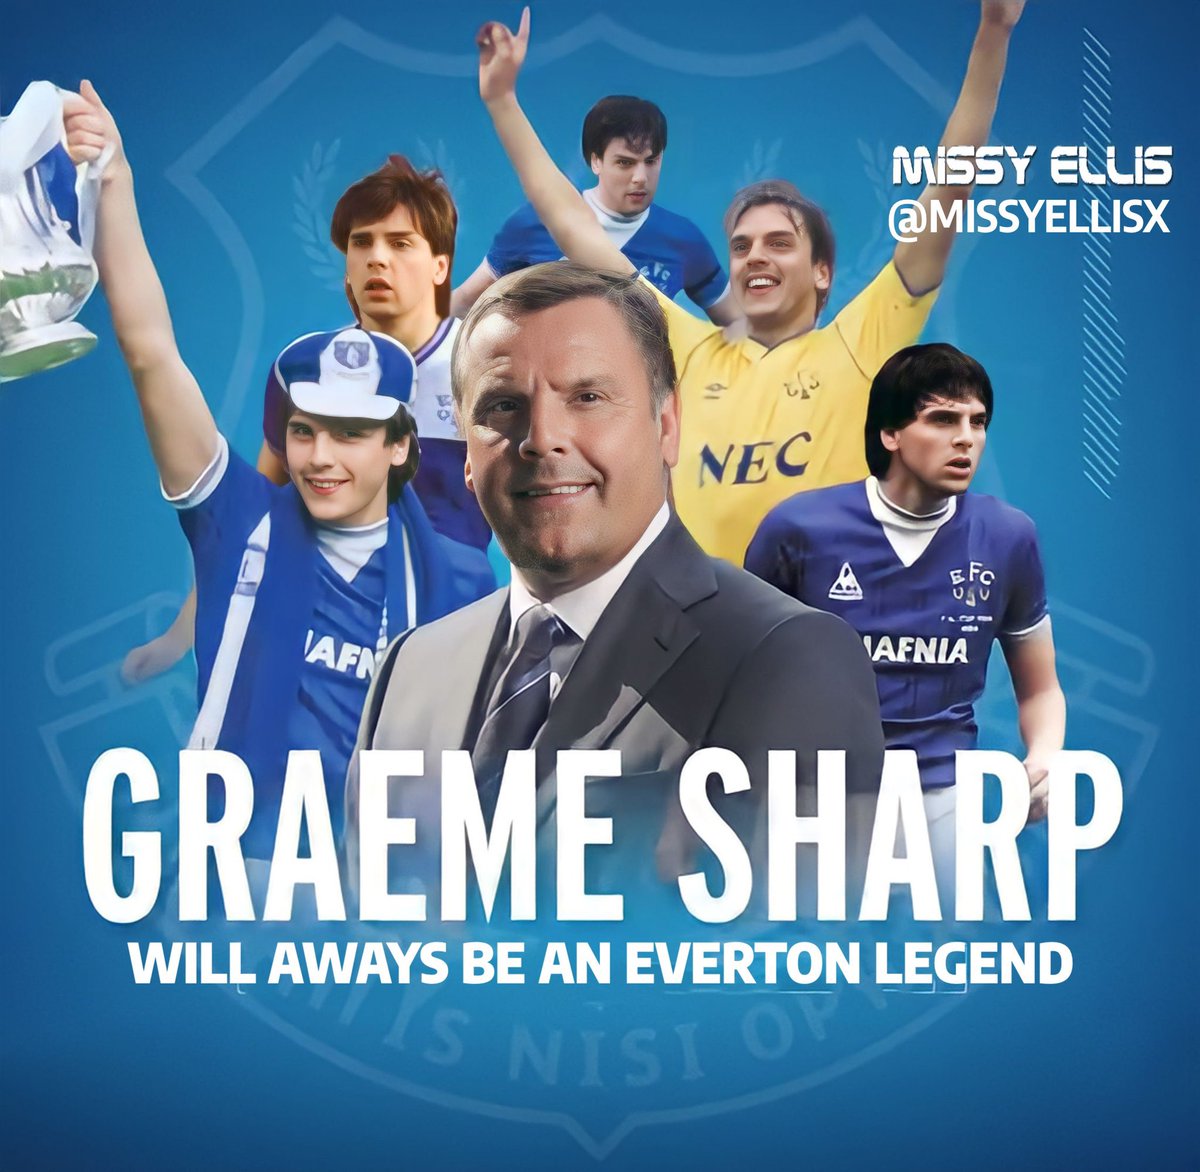 Graeme Sharp was and will always be an Everton Legend. A brief stint on a negligent board (doing something any one of us would love to do) will never change his “Everton Great” status with me. He should always be welcome at Goodison Park, as should any Evertonian. I for one would